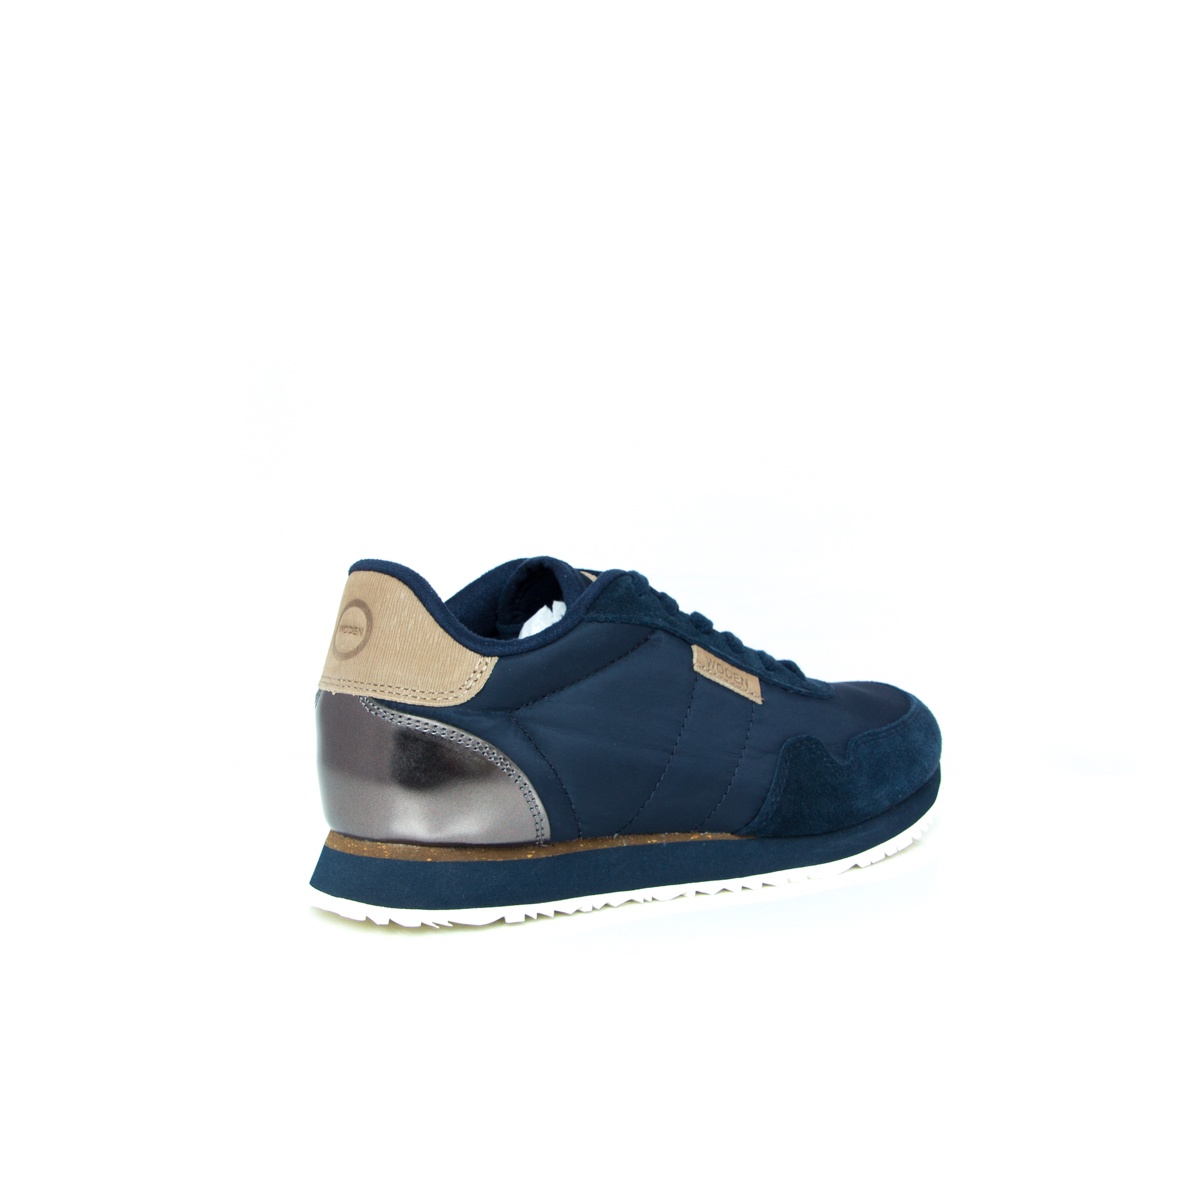 Woden Navy - Shoes